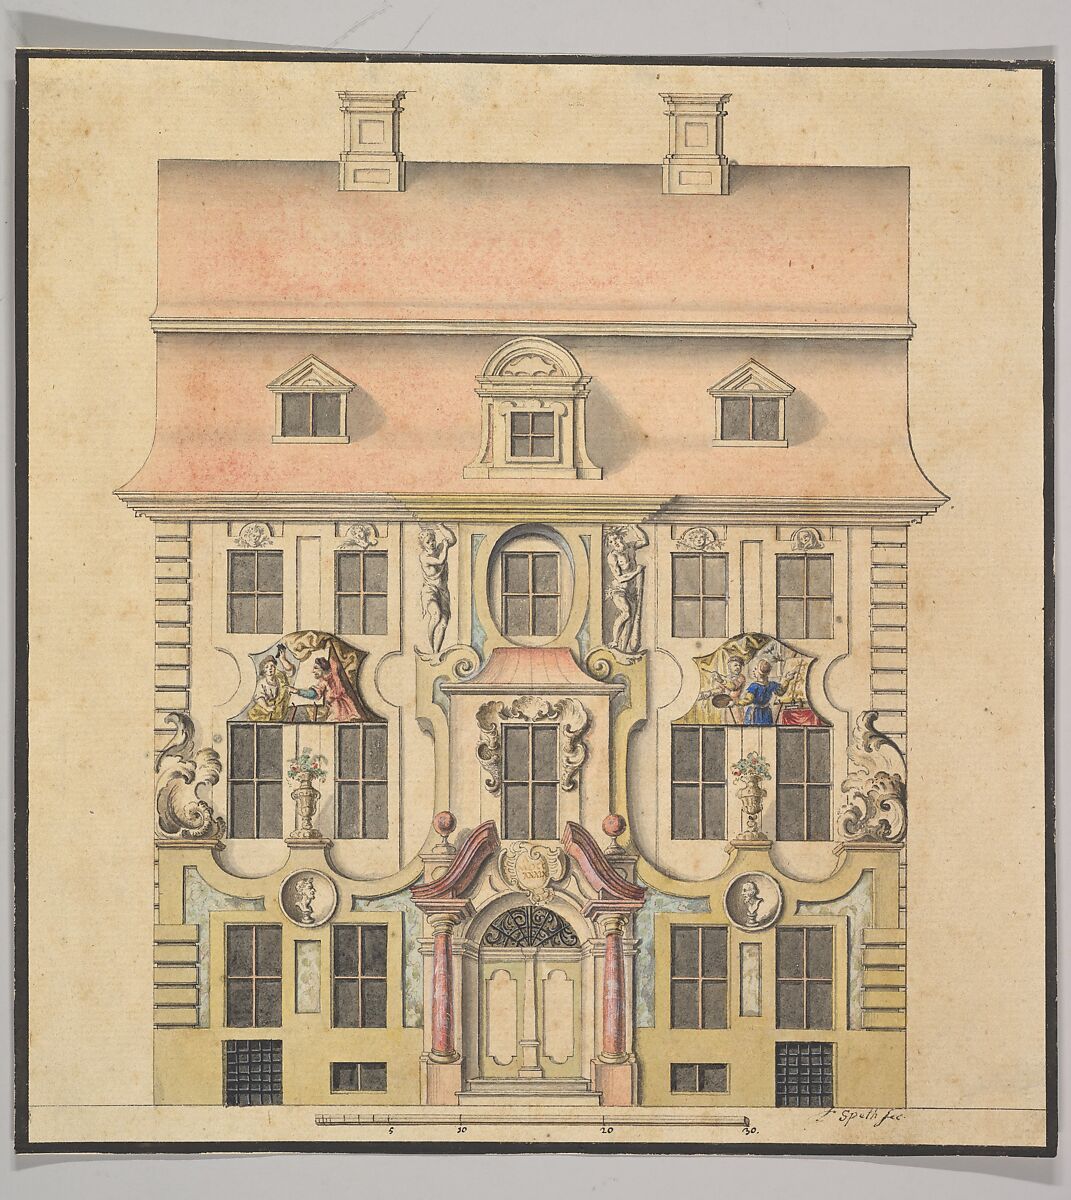 Architectural Design for a Façade, Ferenc (Franz) Speth (Hungarian or Austrian, active 1739–died 1769), Watercolor and pen and black ink 